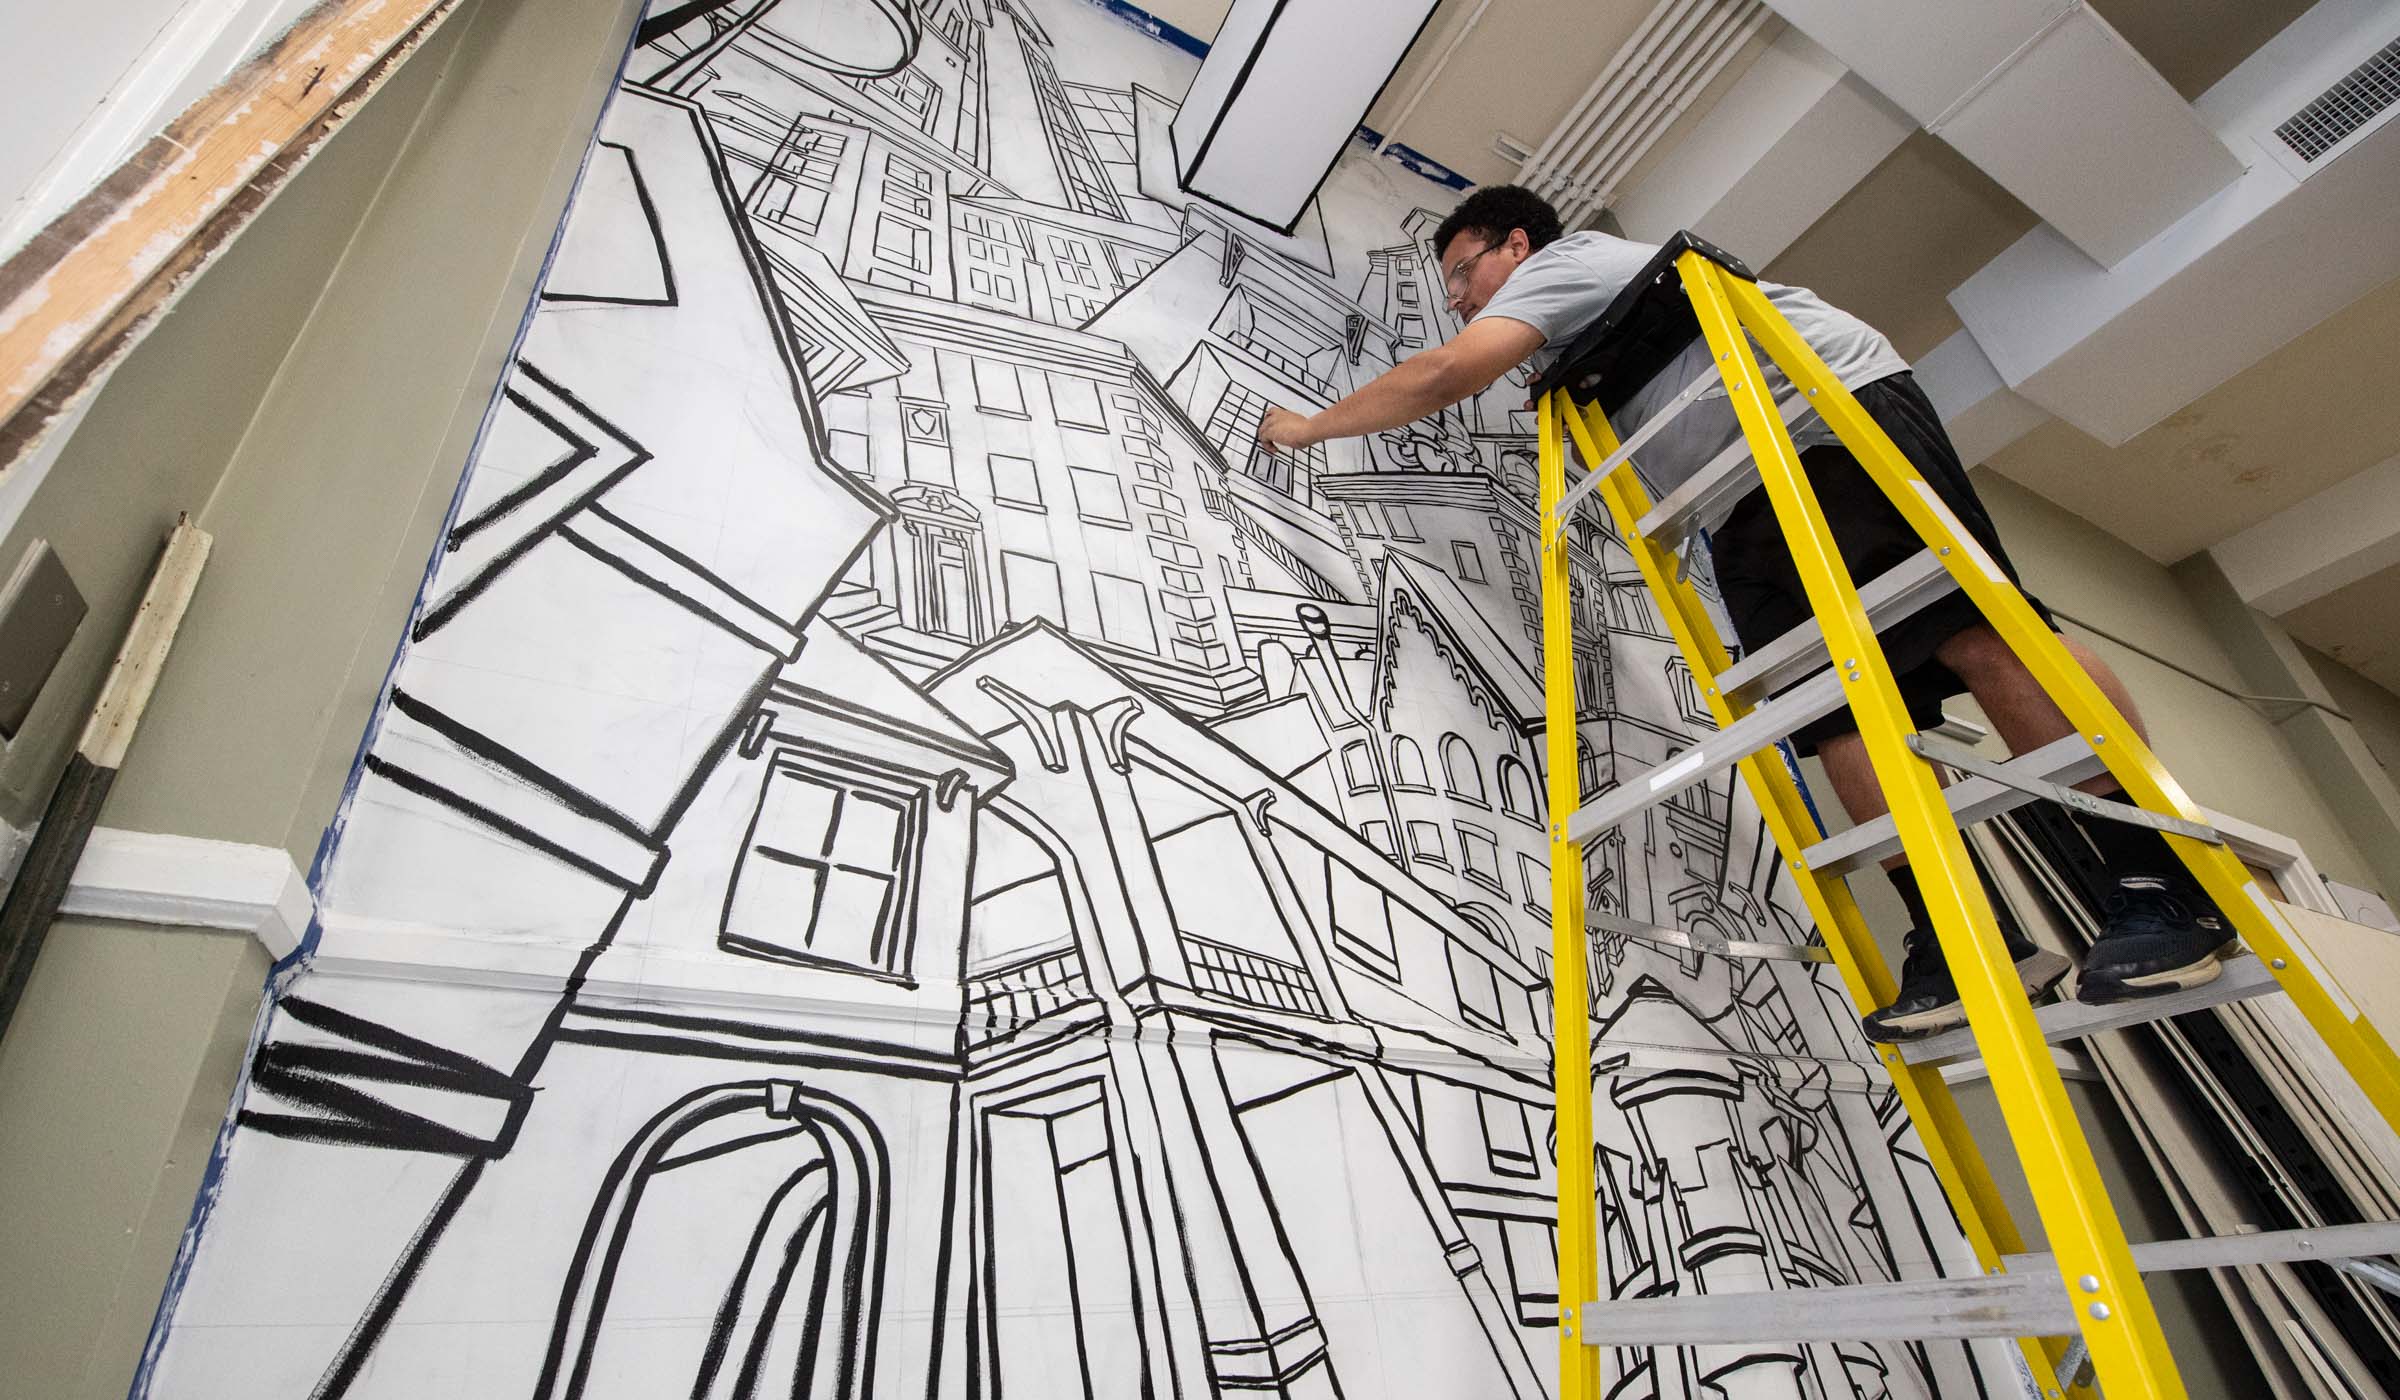 A painted black and white mural covers a wall with a cacophony of MSU residence halls graphically depicted and to the right of the frame, the artist student reaches out to work from the top of a yellow ladder.